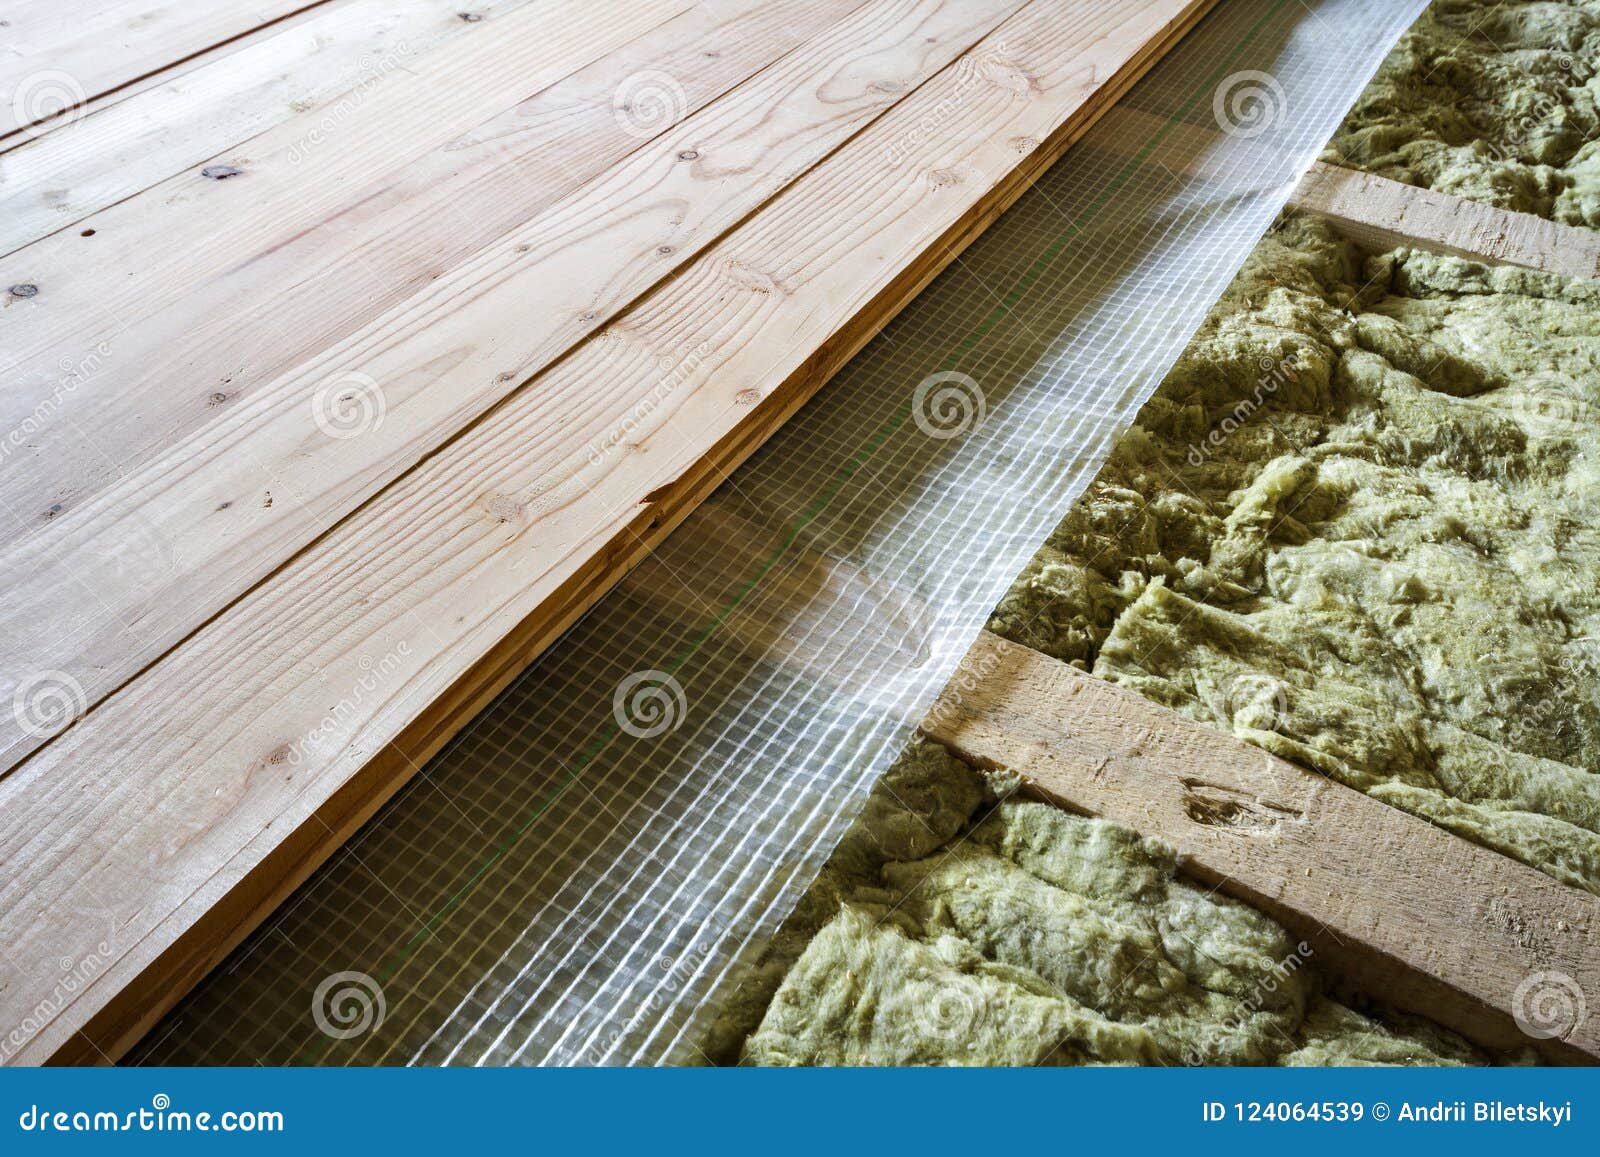 installation of new floor of wooden natural planks and mineral wool insulation for isolation and keeping warmth. modern technologi